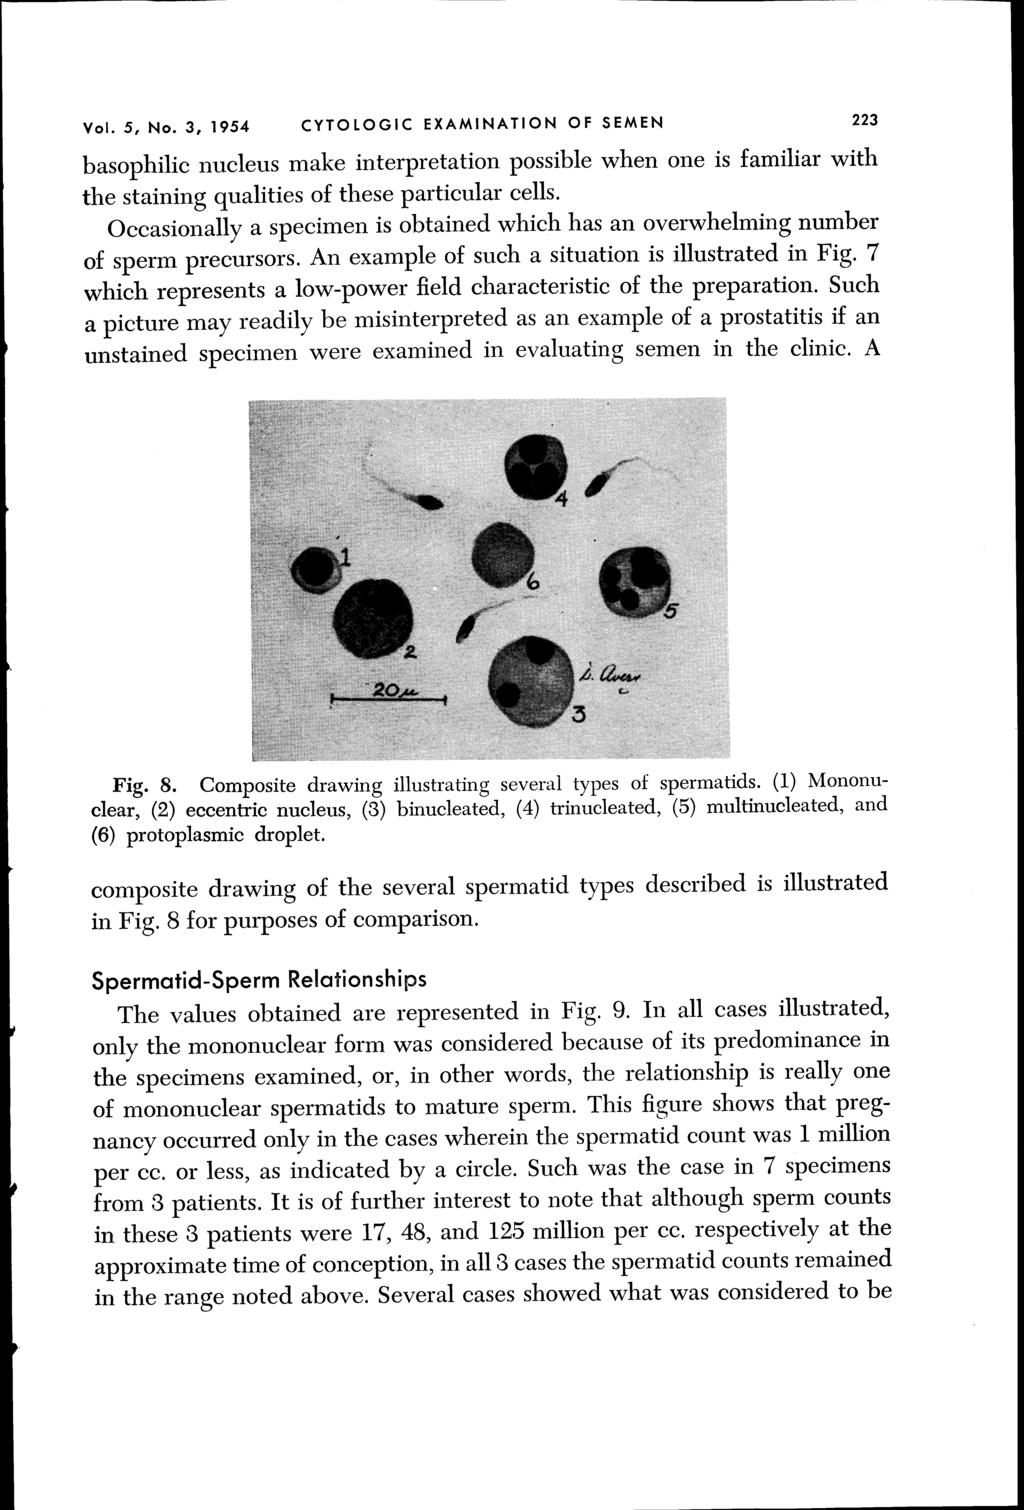 Vol. 5, No.3, 1954 CYTOLOGIC EXAMINATION OF SEMEN 223 basophilic nucleus make interpretation possible when one is familiar with the staining qualities of these particular cells.